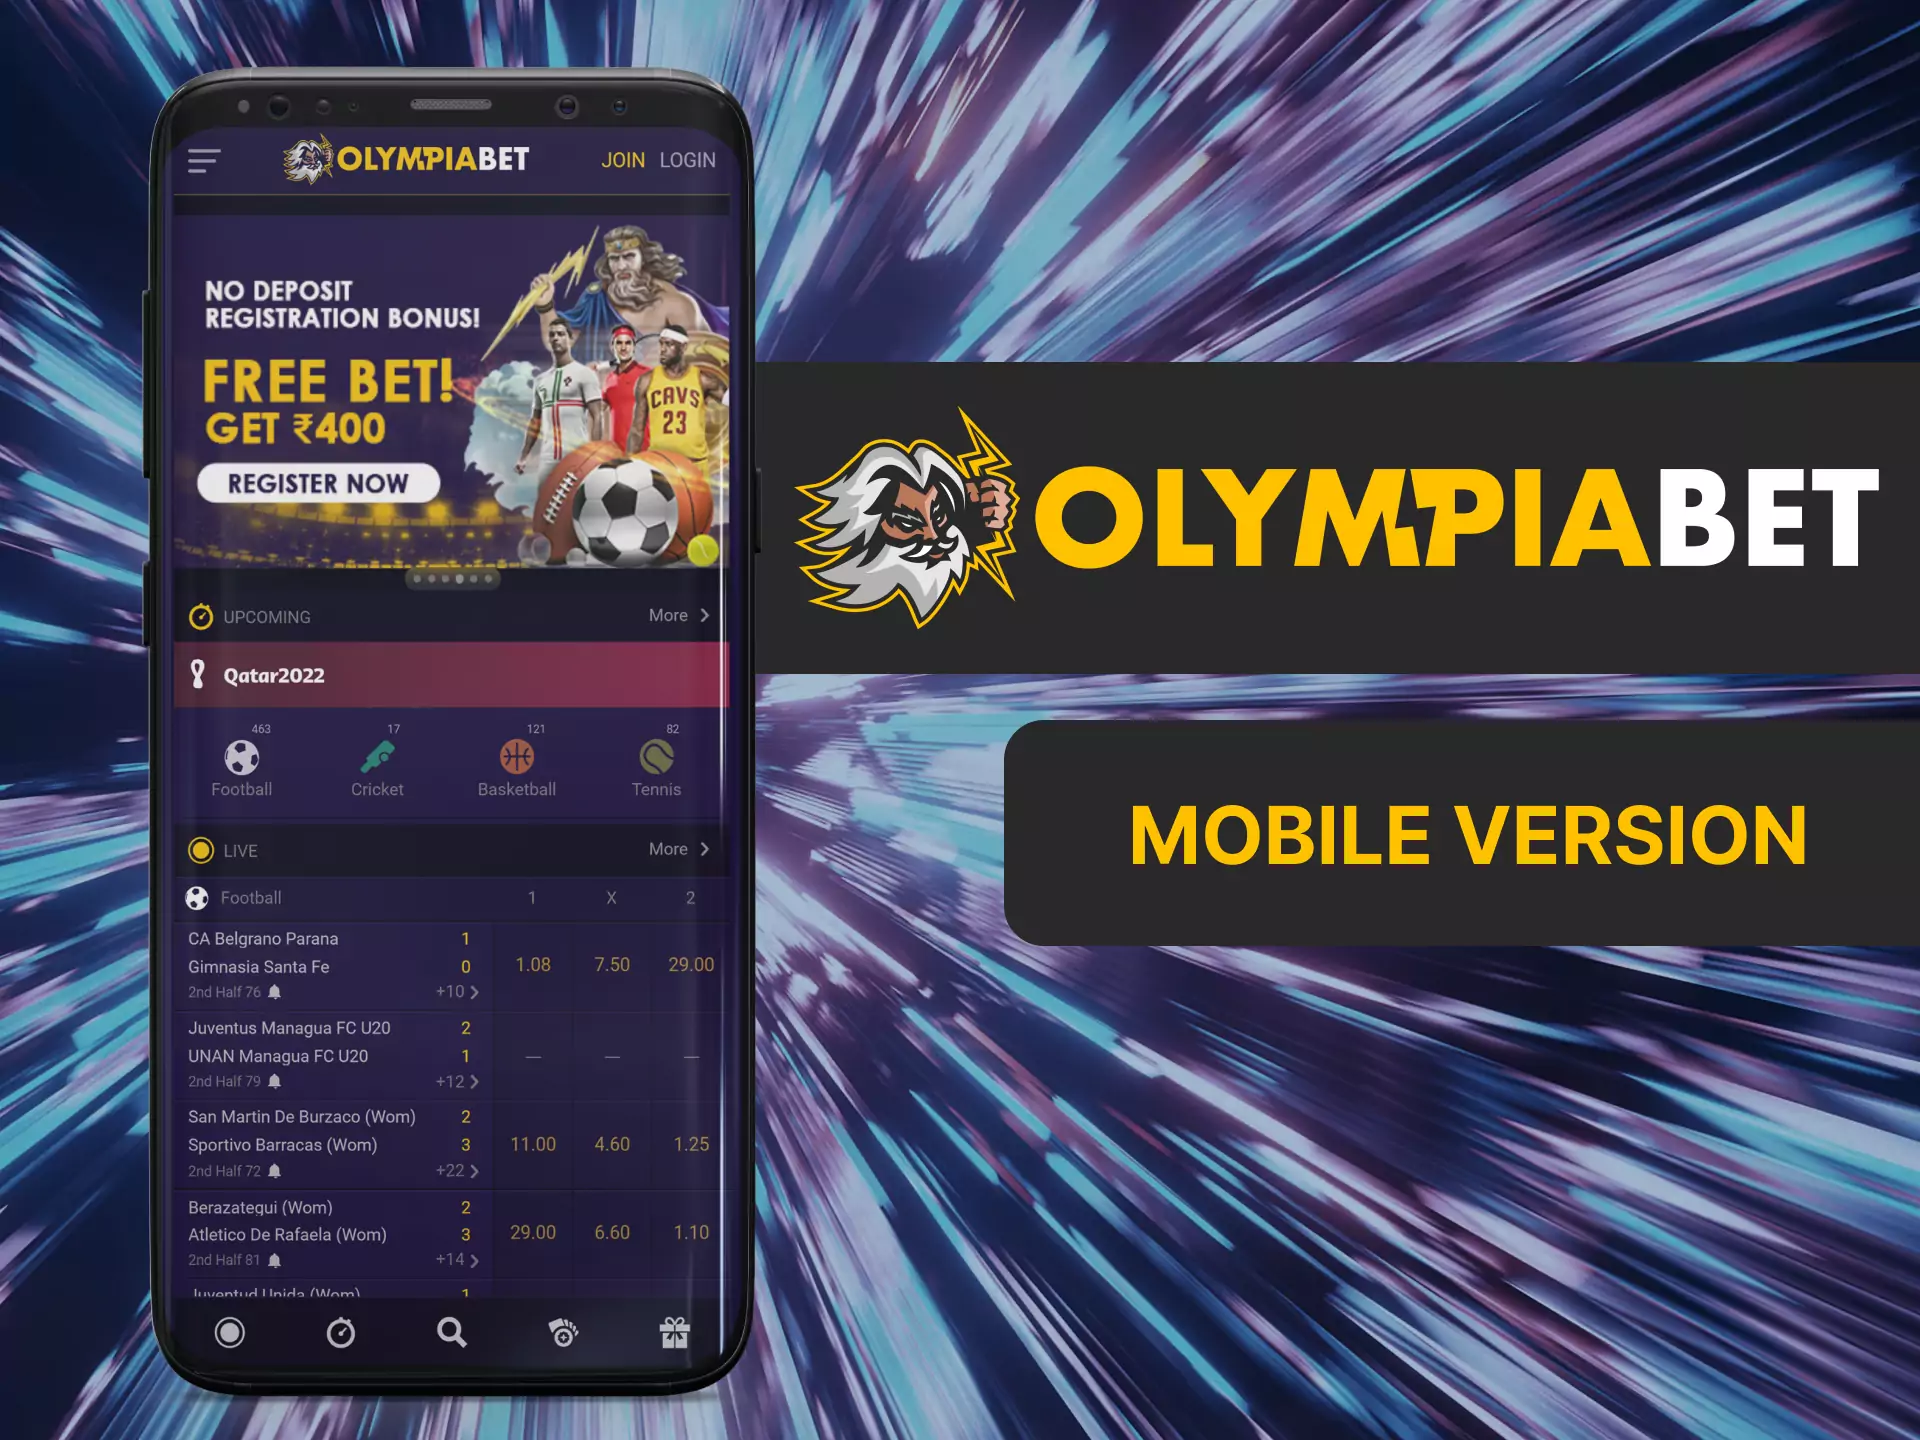 The mobile version of OlympiaBet offers players convenient functionality and intuitive control.